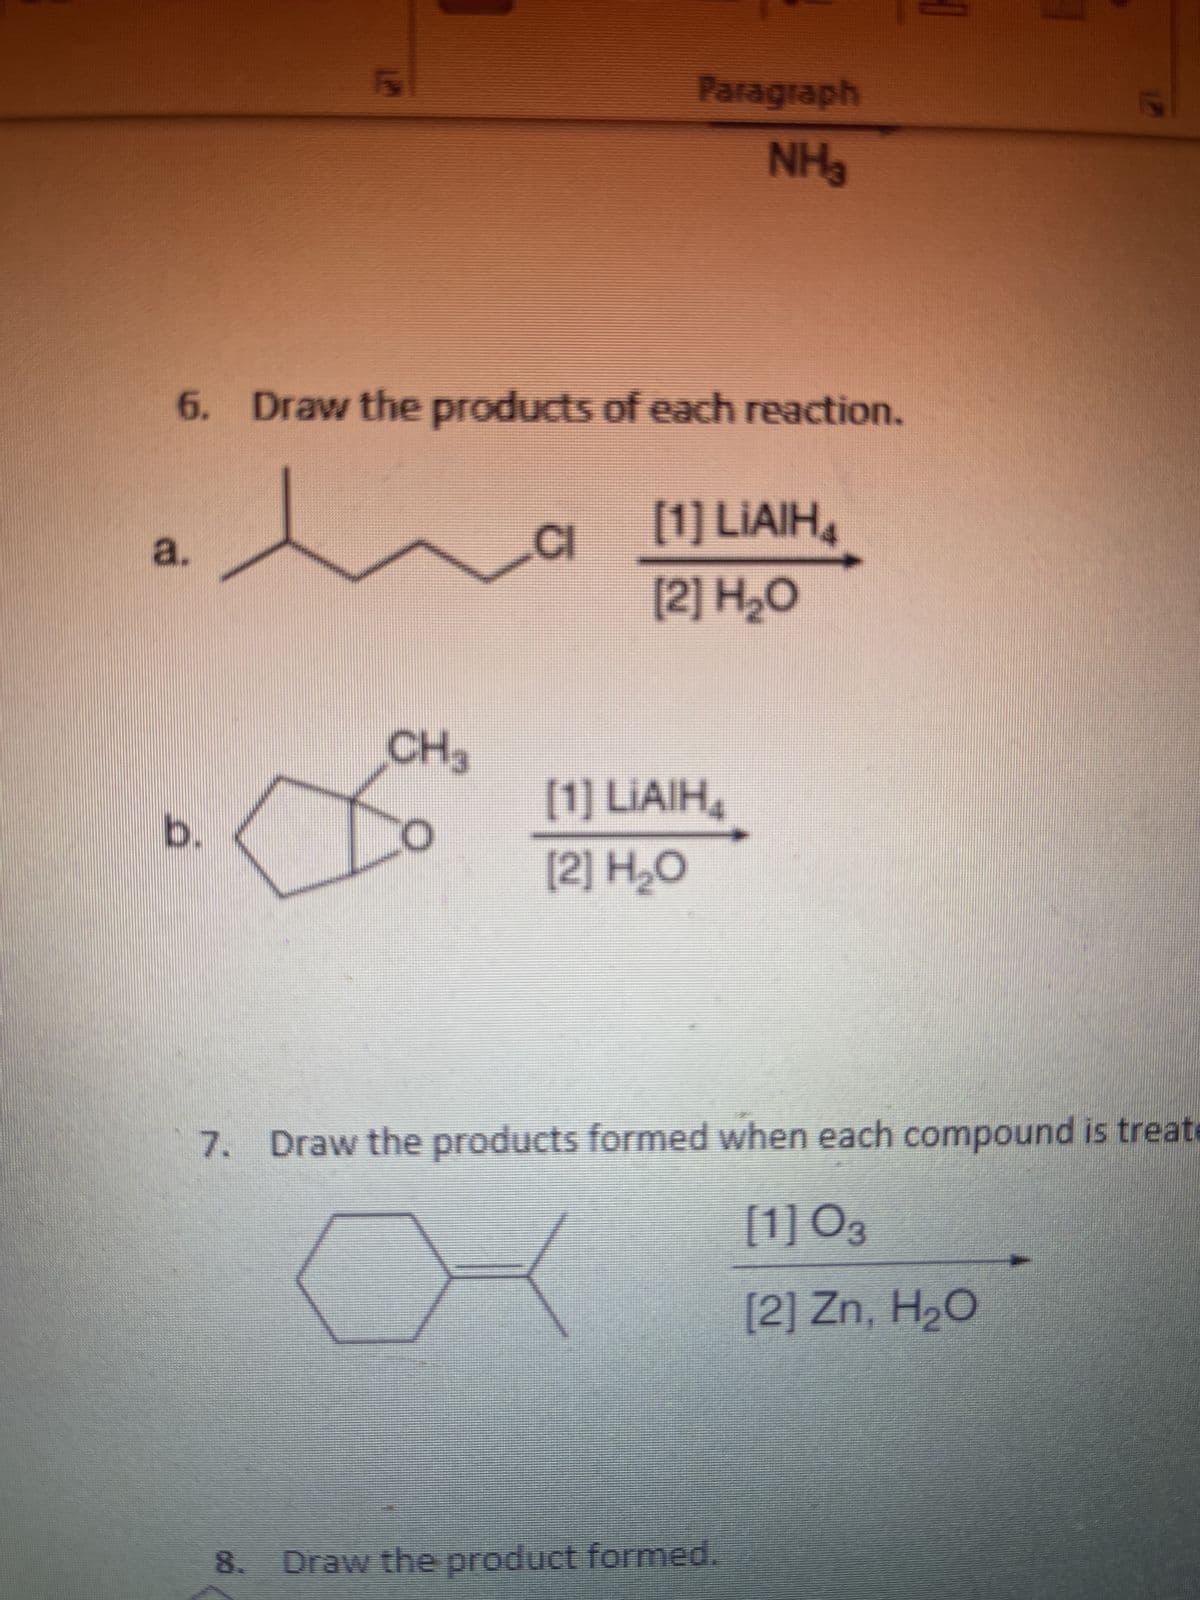 a.
LM
b.
5
6. Draw the products of each reaction.
CH3
Paragraph
NH₂
CI
[1] LIAIH4
[2] H₂O
[1] LIAIH₁
[2] H₂O
17
7. Draw the products formed when each compound is treate
[1] 03
X
[2] Zn, H₂O
8. Draw the product formed.